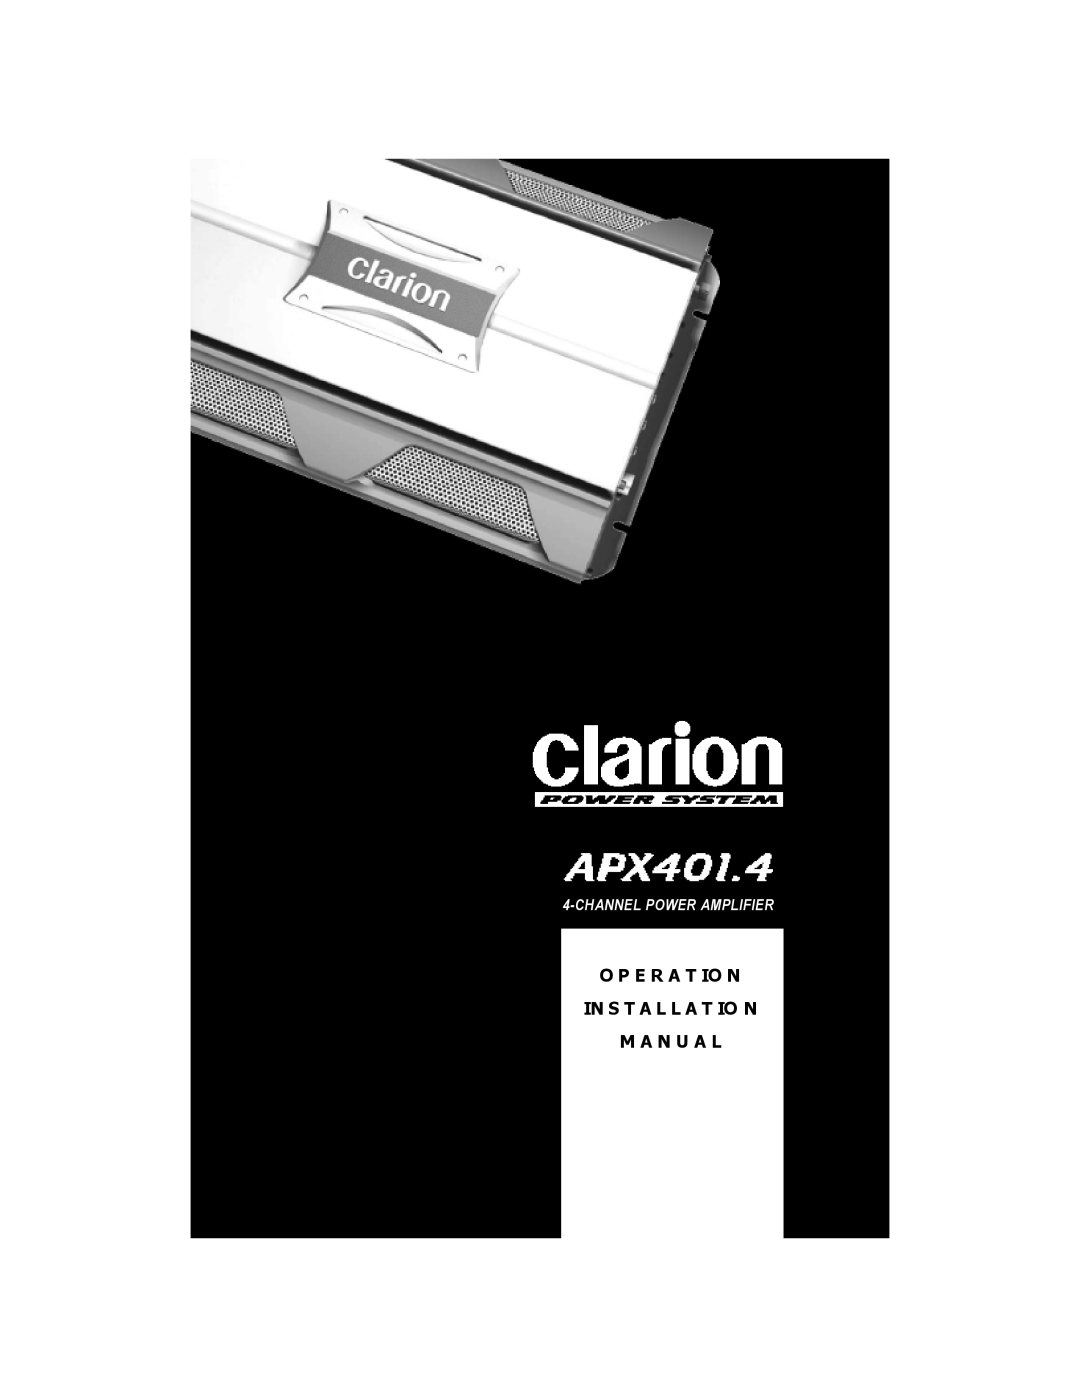 Clarion APX401.4 installation manual Channelpower Amplifier 